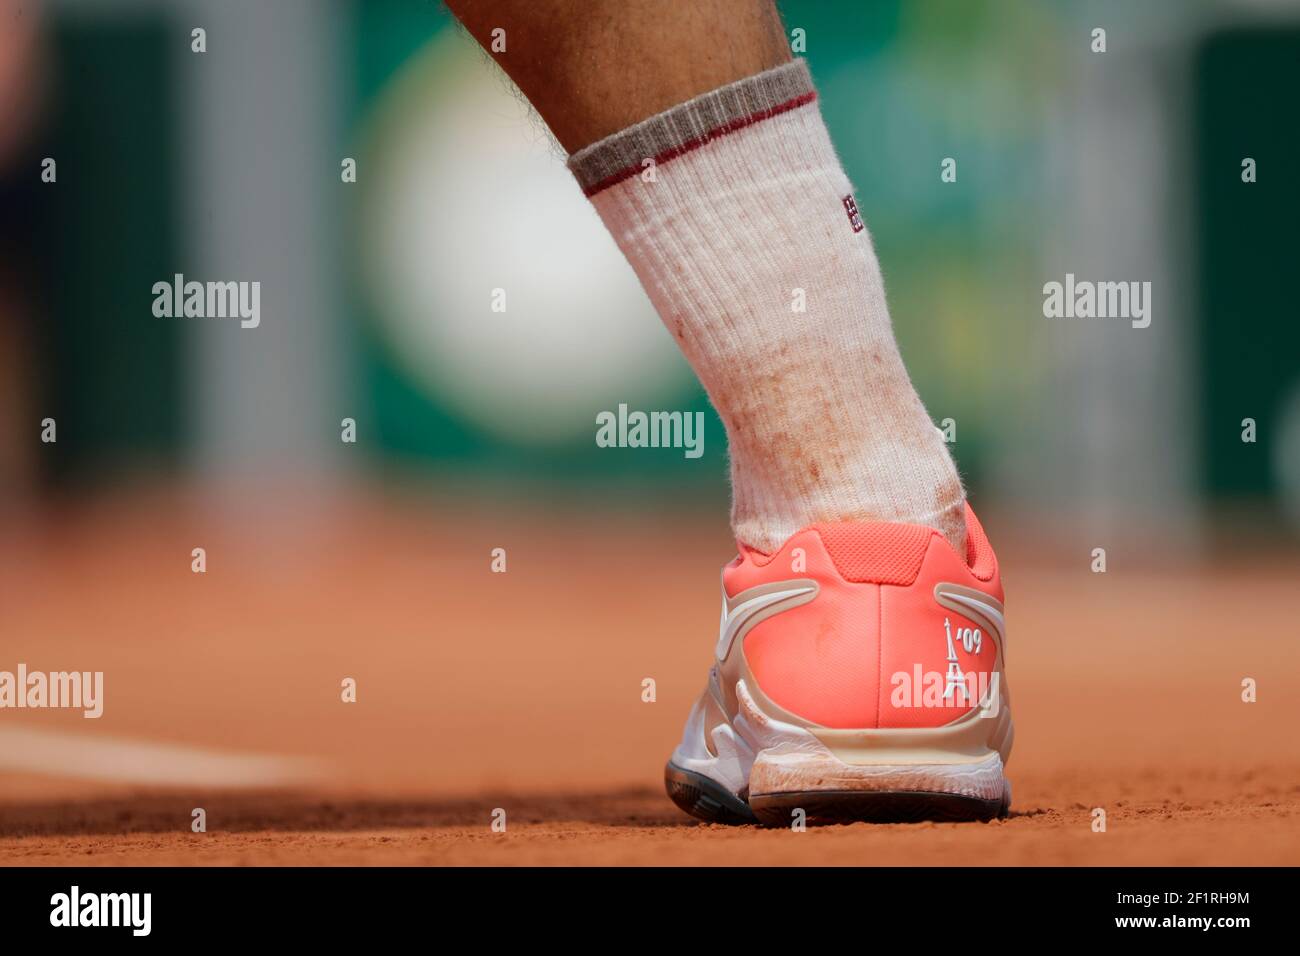 Nike shoes of Roger FEDERER (SUI) with Eiffel Tower 09 during the Roland-Garros  2019, Grand Slam Tennis Tournament, men's draw on June 4, 2019 at Roland- Garros stadium in Paris, France - Photo